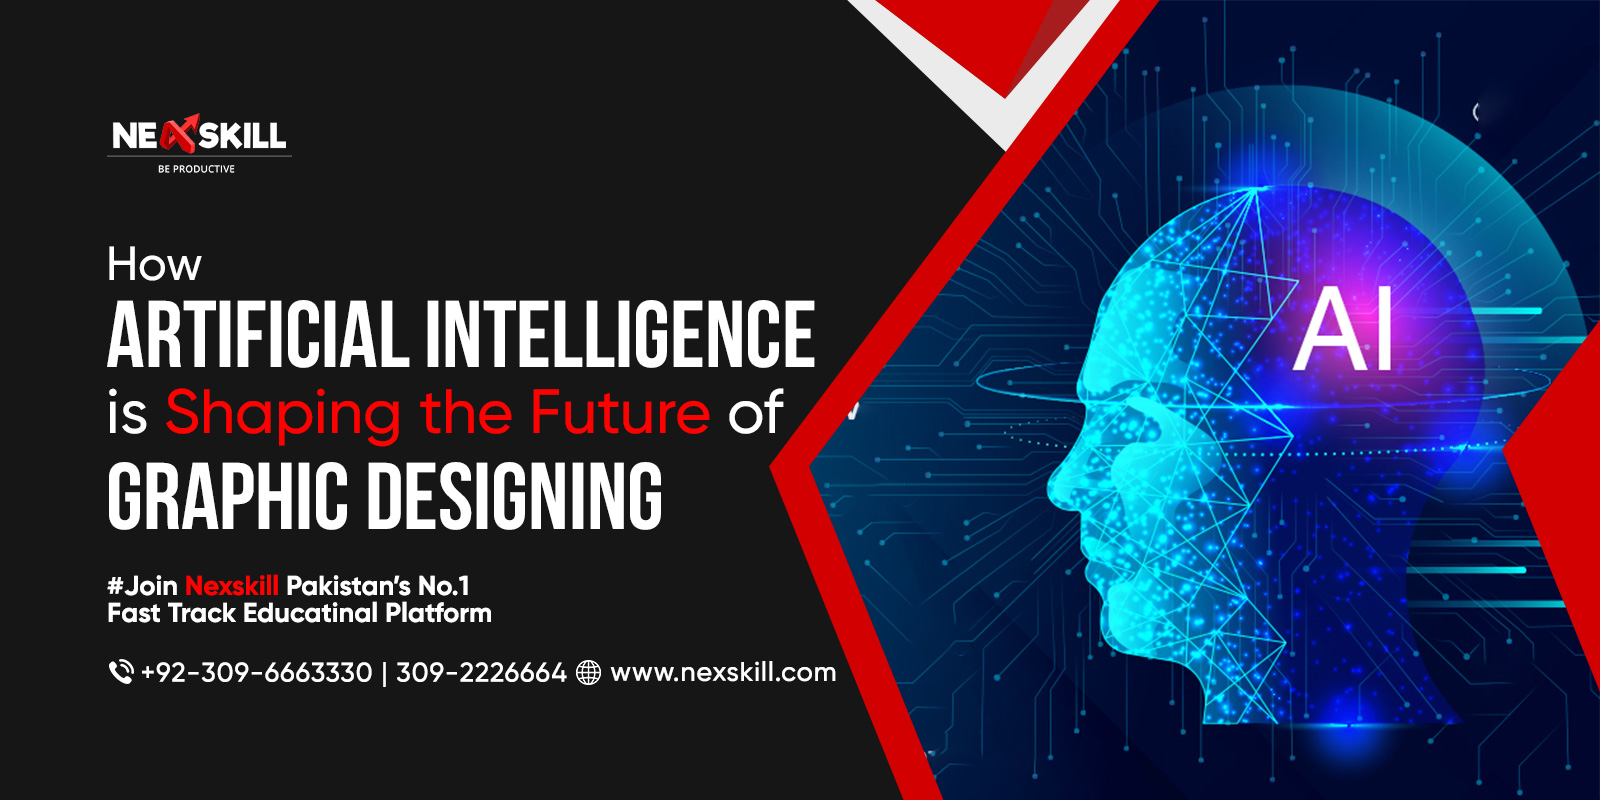 How Artificial Intelligence is Shaping the Future of Graphic Designing